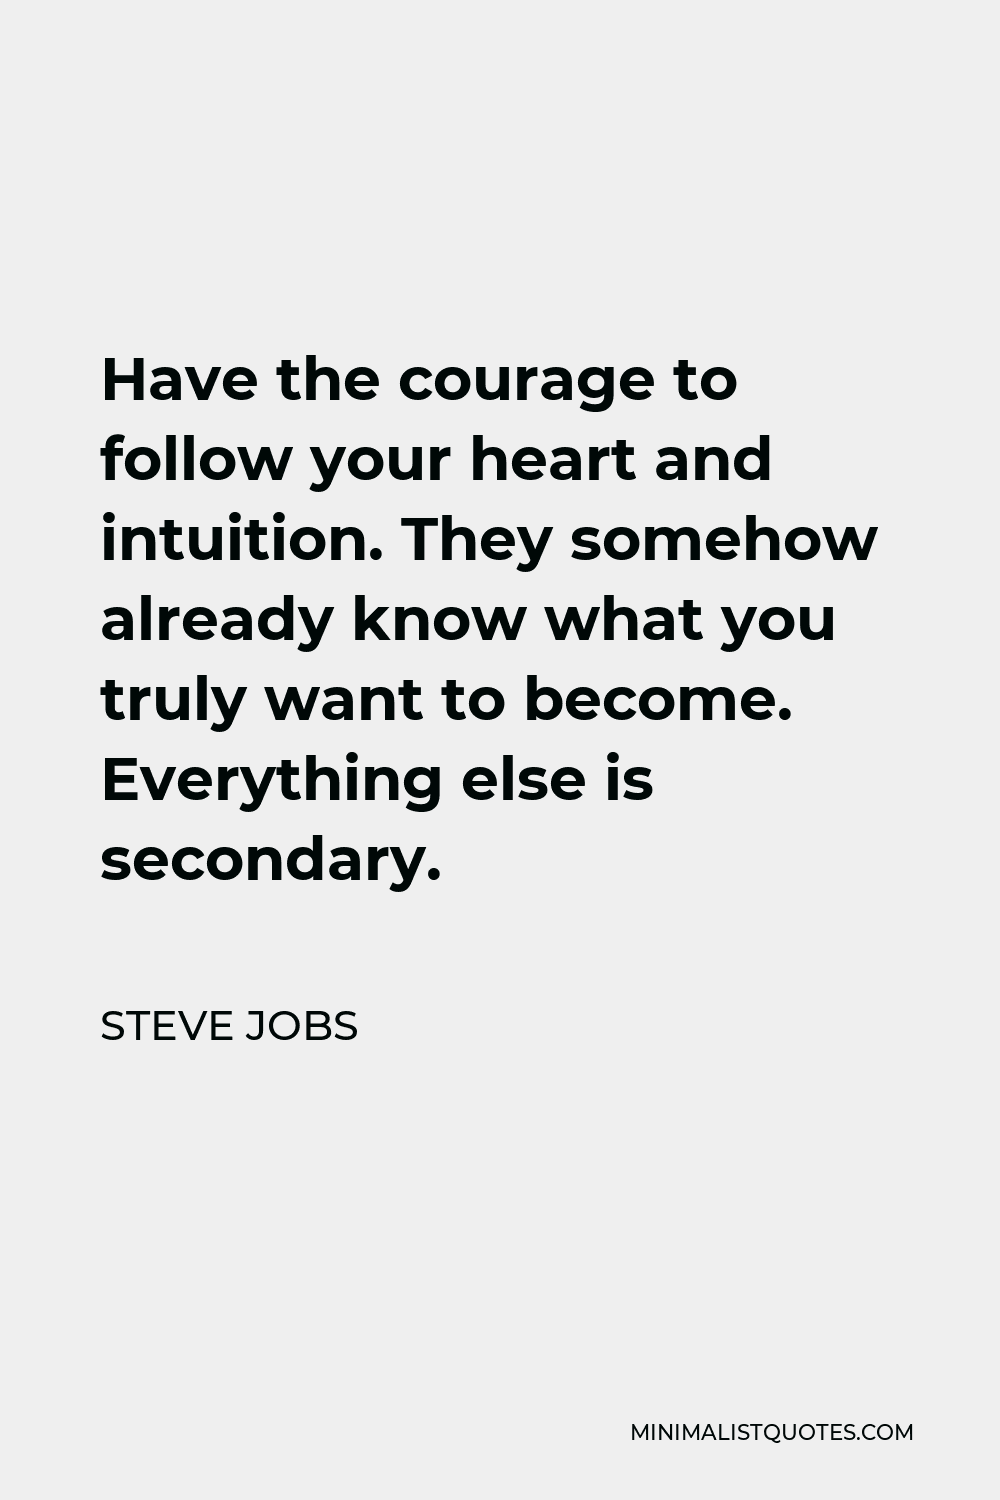 Steve Jobs Quote - Have the courage to follow your heart and intuition. They somehow already know what you truly want to become. Everything else is secondary.